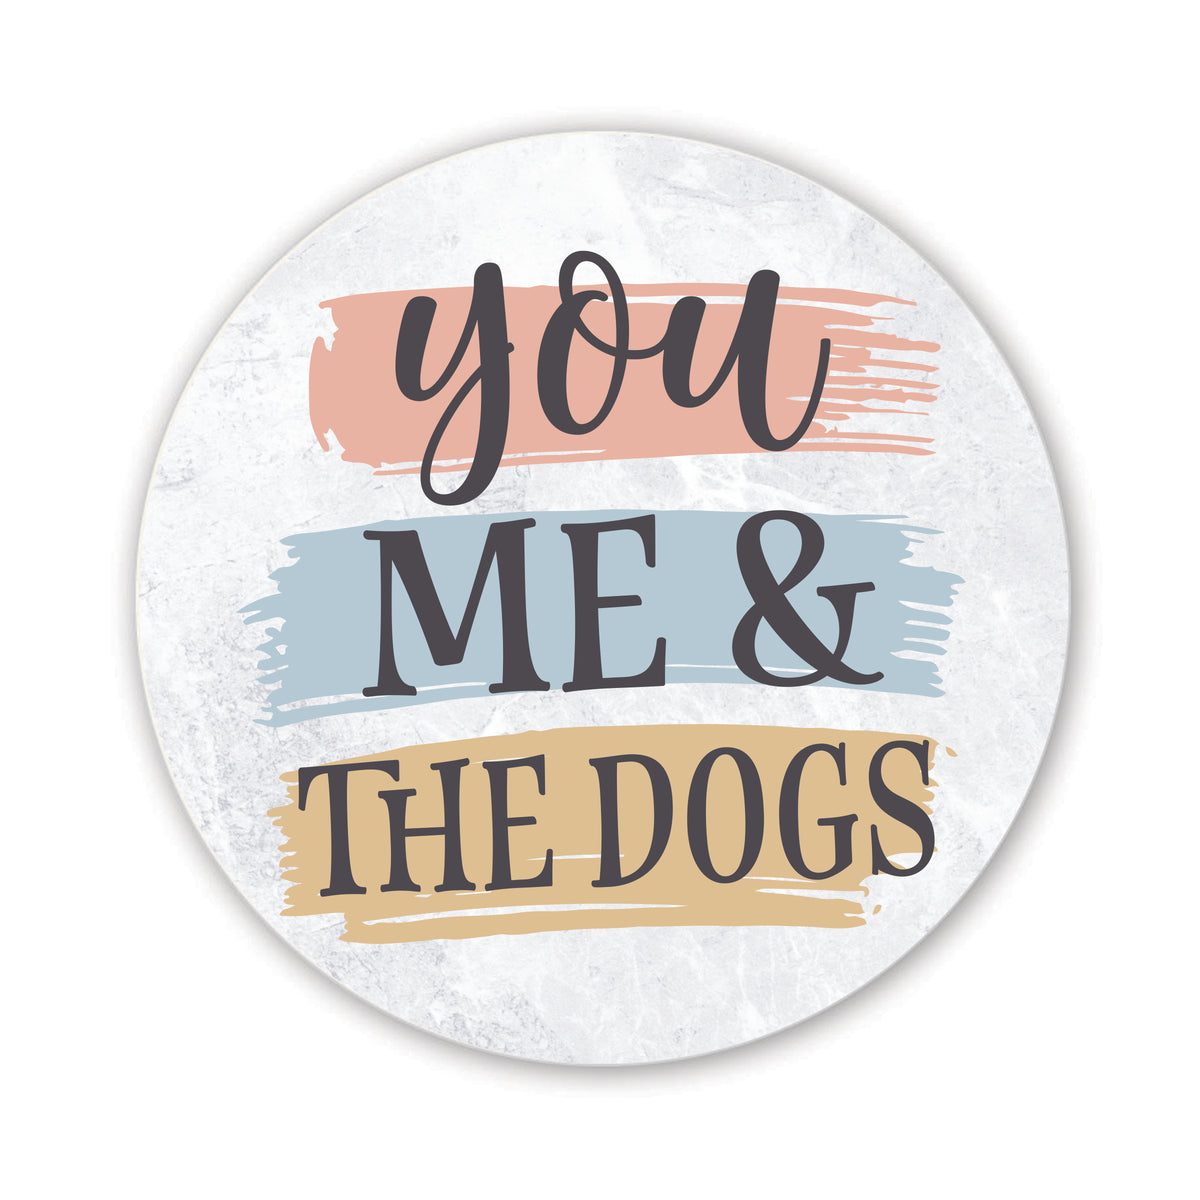 Refrigerator Magnet Perfect Gift Idea For Pet Owners - You Me &amp; The Dogs